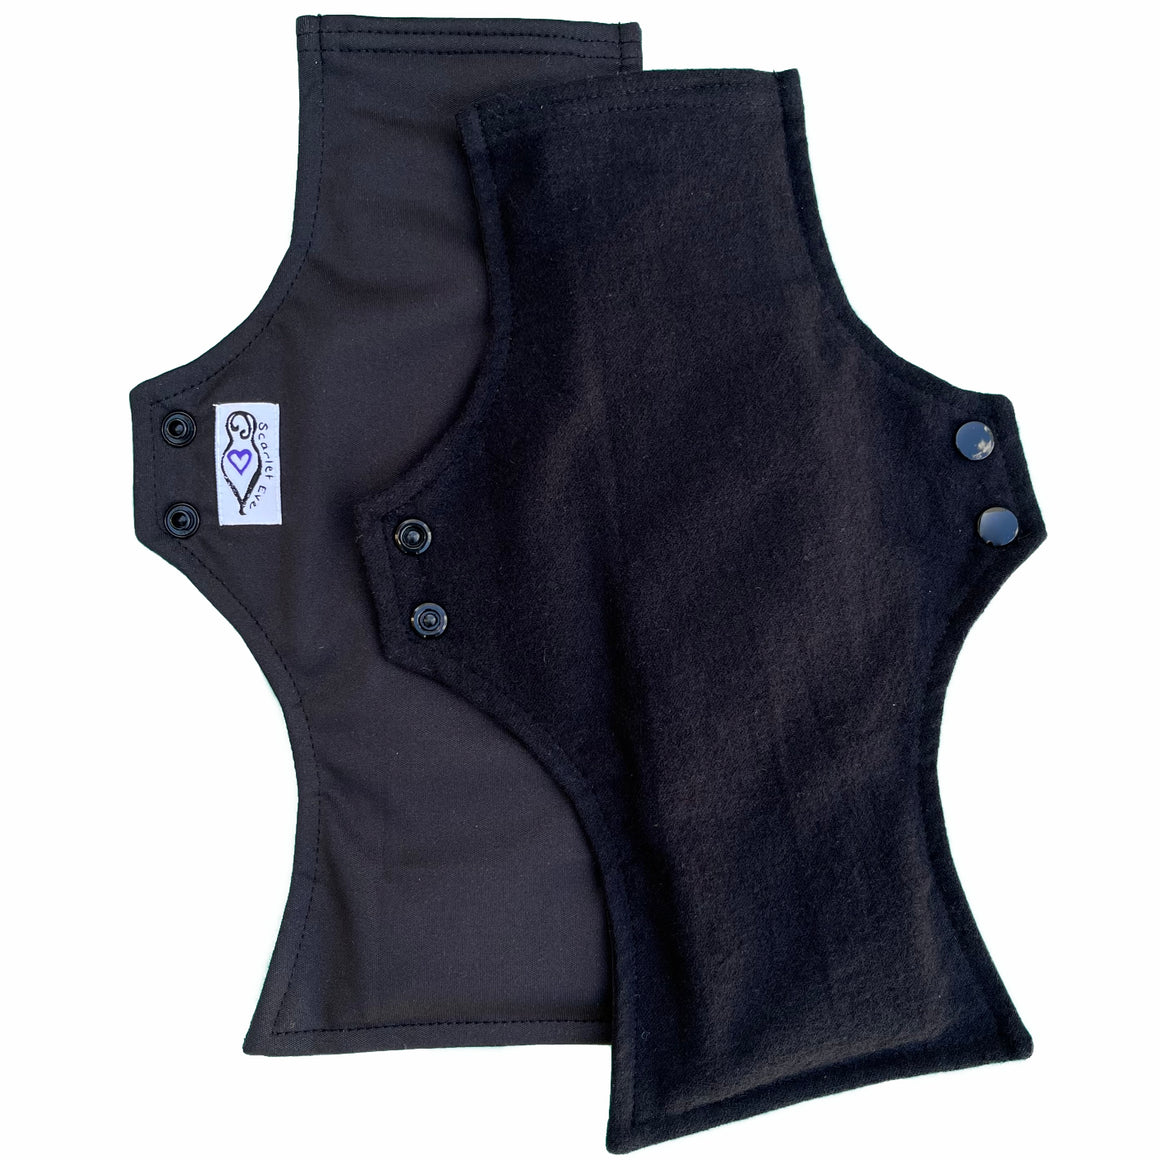 Scarlet Eve Basics Uber Pad. Top: Soft, black cotton flannel. Back: Solid black PUL. 4 layer flip-out bamboo fleece booster. For absorbency and length.